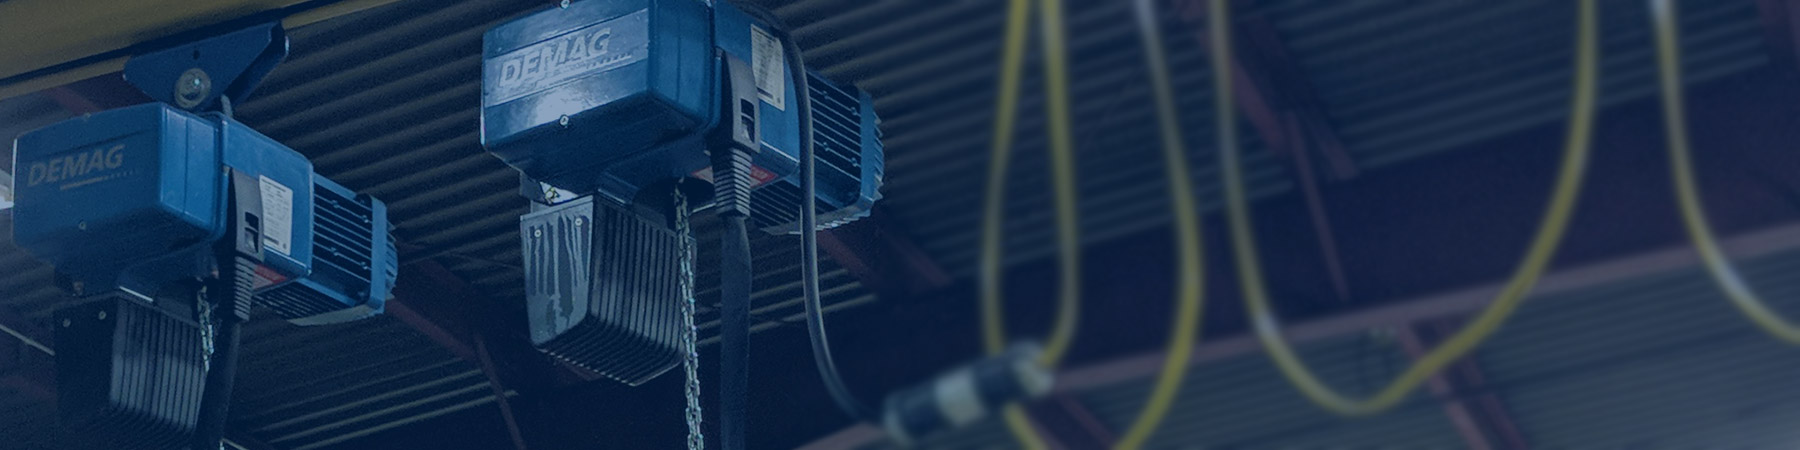 Demag Electric Chain Hoists